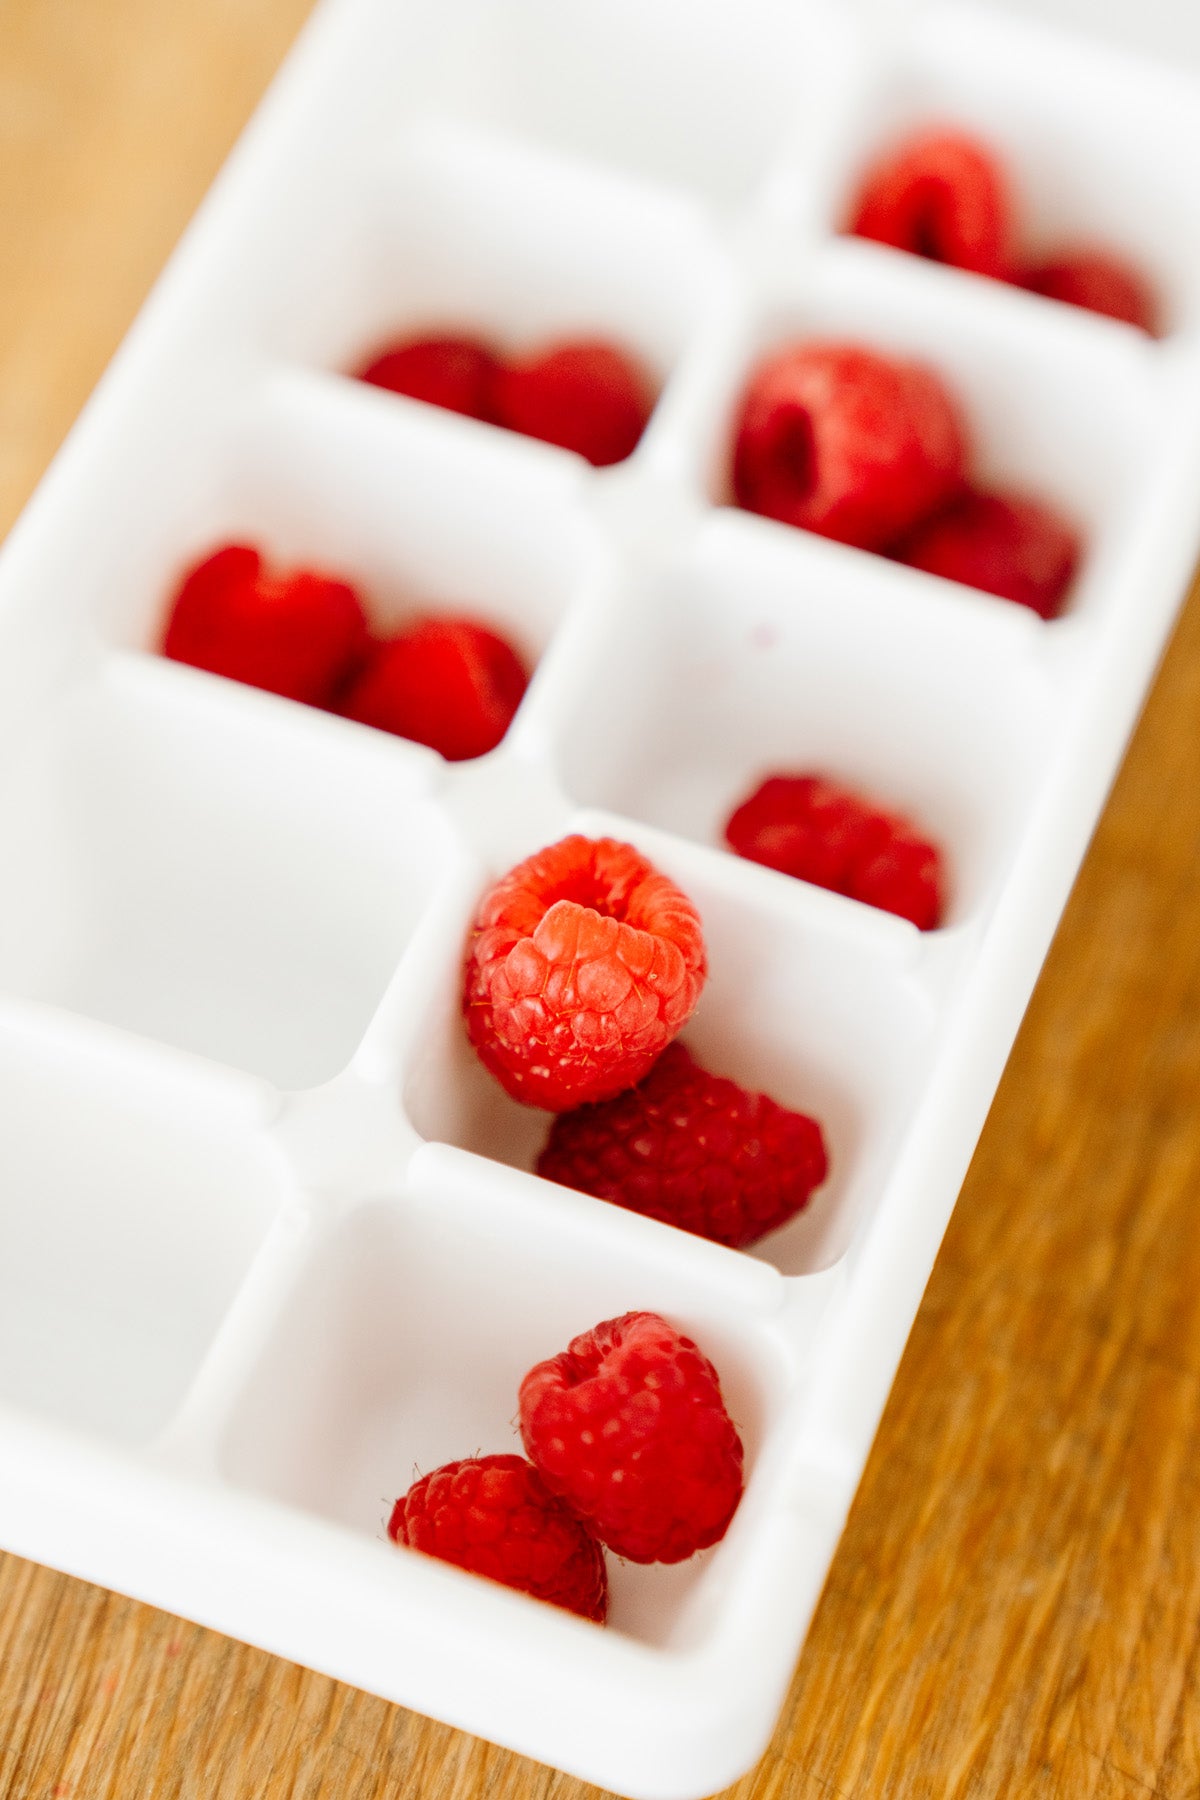 Festive 4th of July: Raspberry & Blueberry Ice Cubes